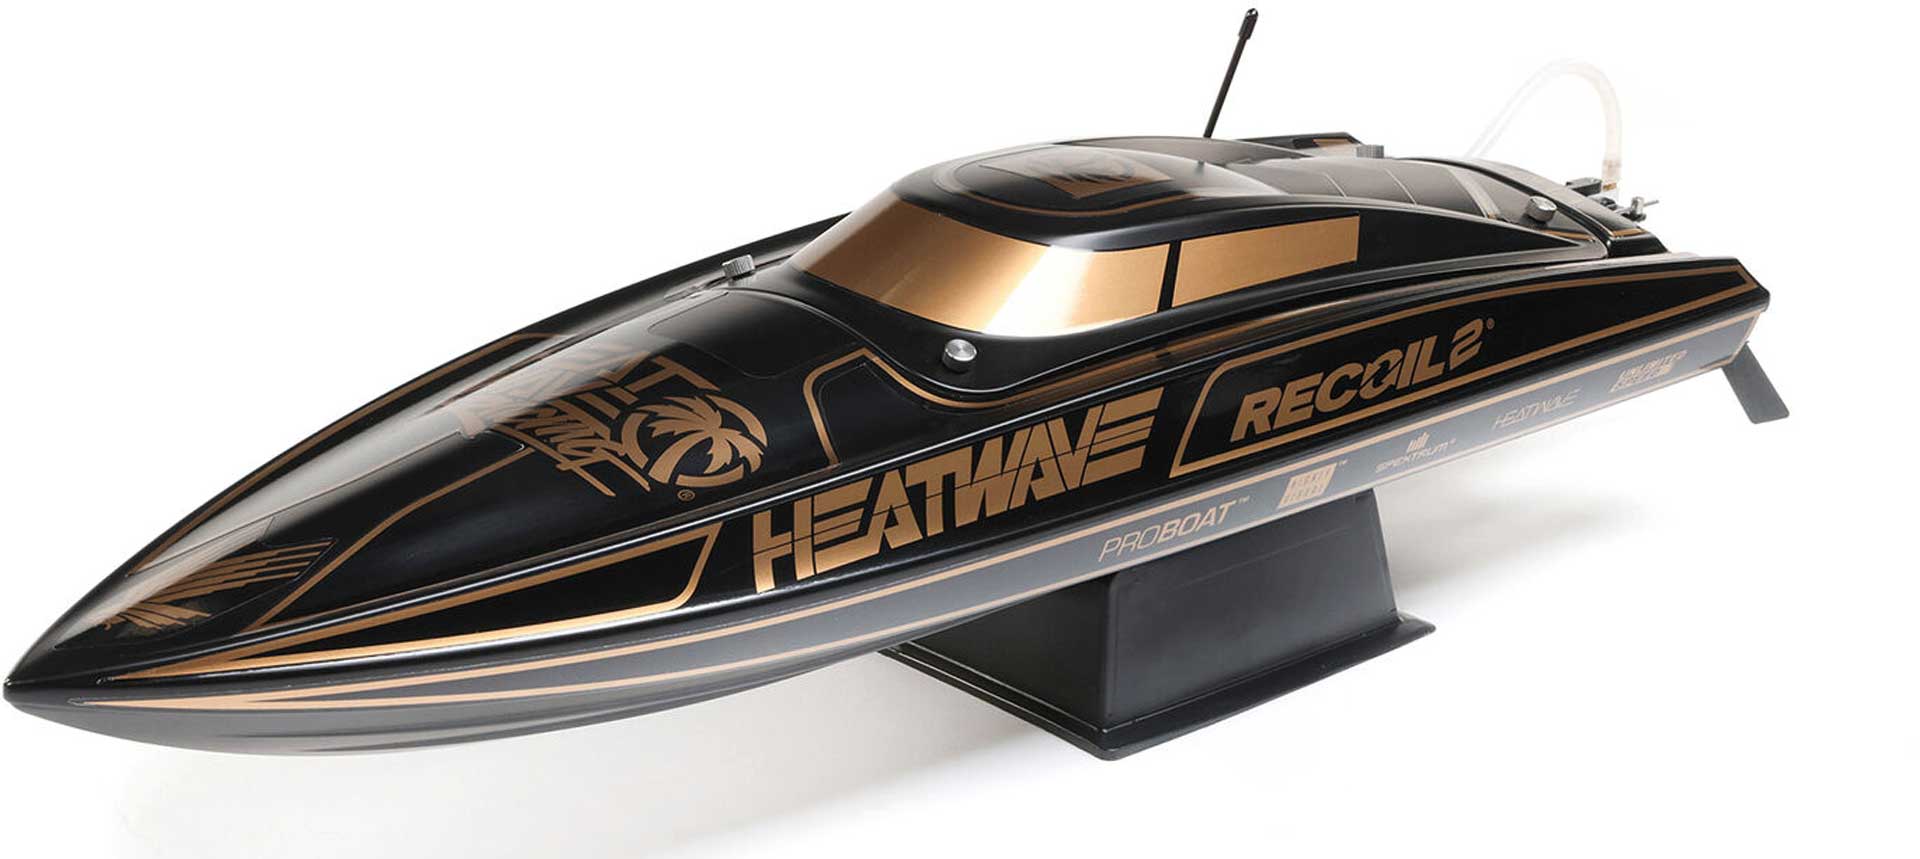 PROBOAT Recoil 2 "Heatwave" 26" Self-Righting Brushless Rennboot RTR